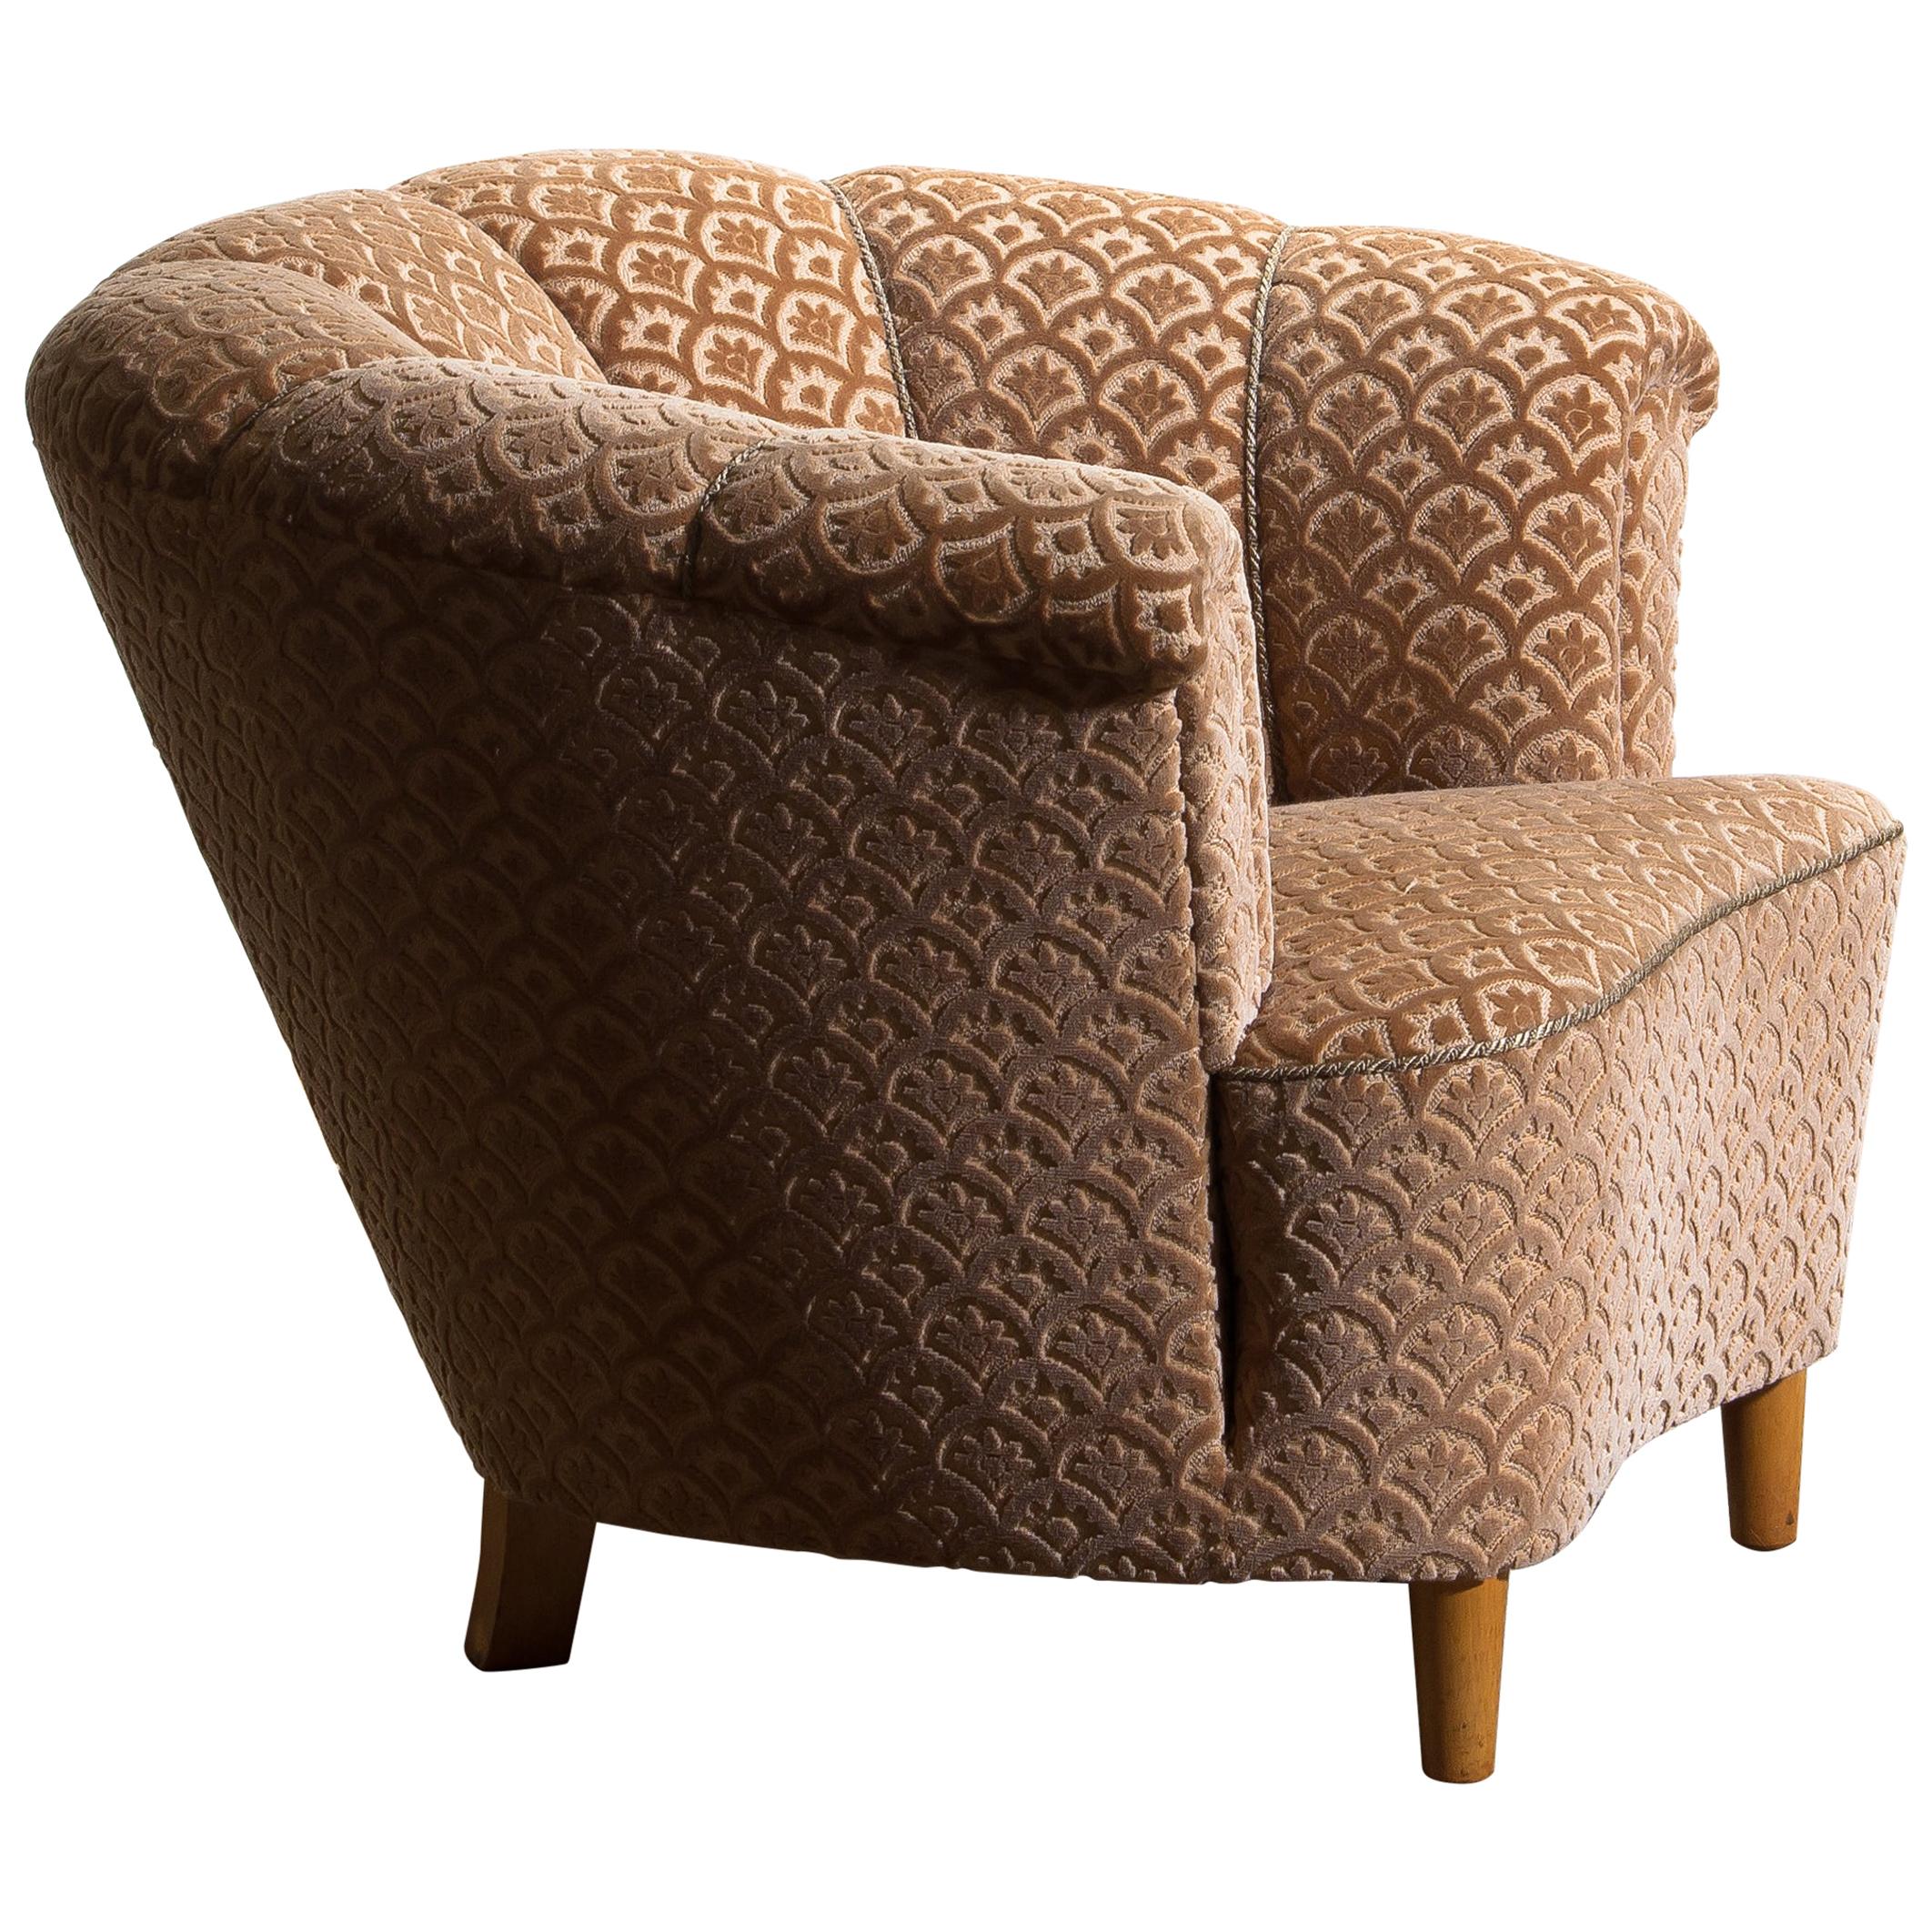 Mid-Century Modern 1940s, Velvet Jacquard Club Lounge Cocktail Chair from Sweden 1